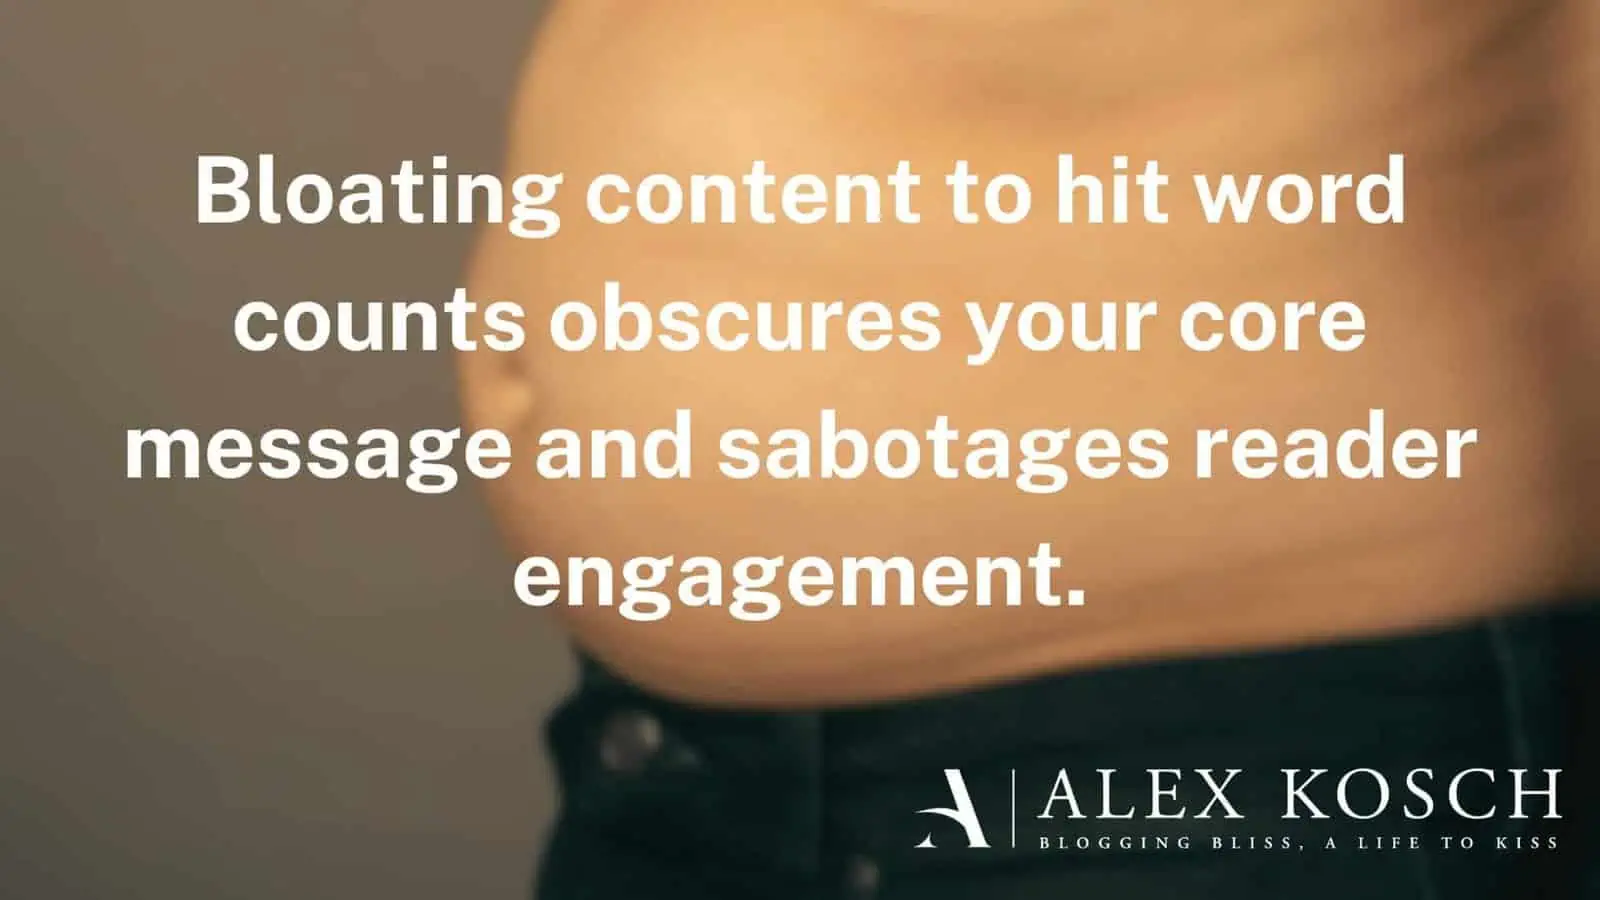 Bloating content to hit word counts obscures your core message and sabotages reader engagement.